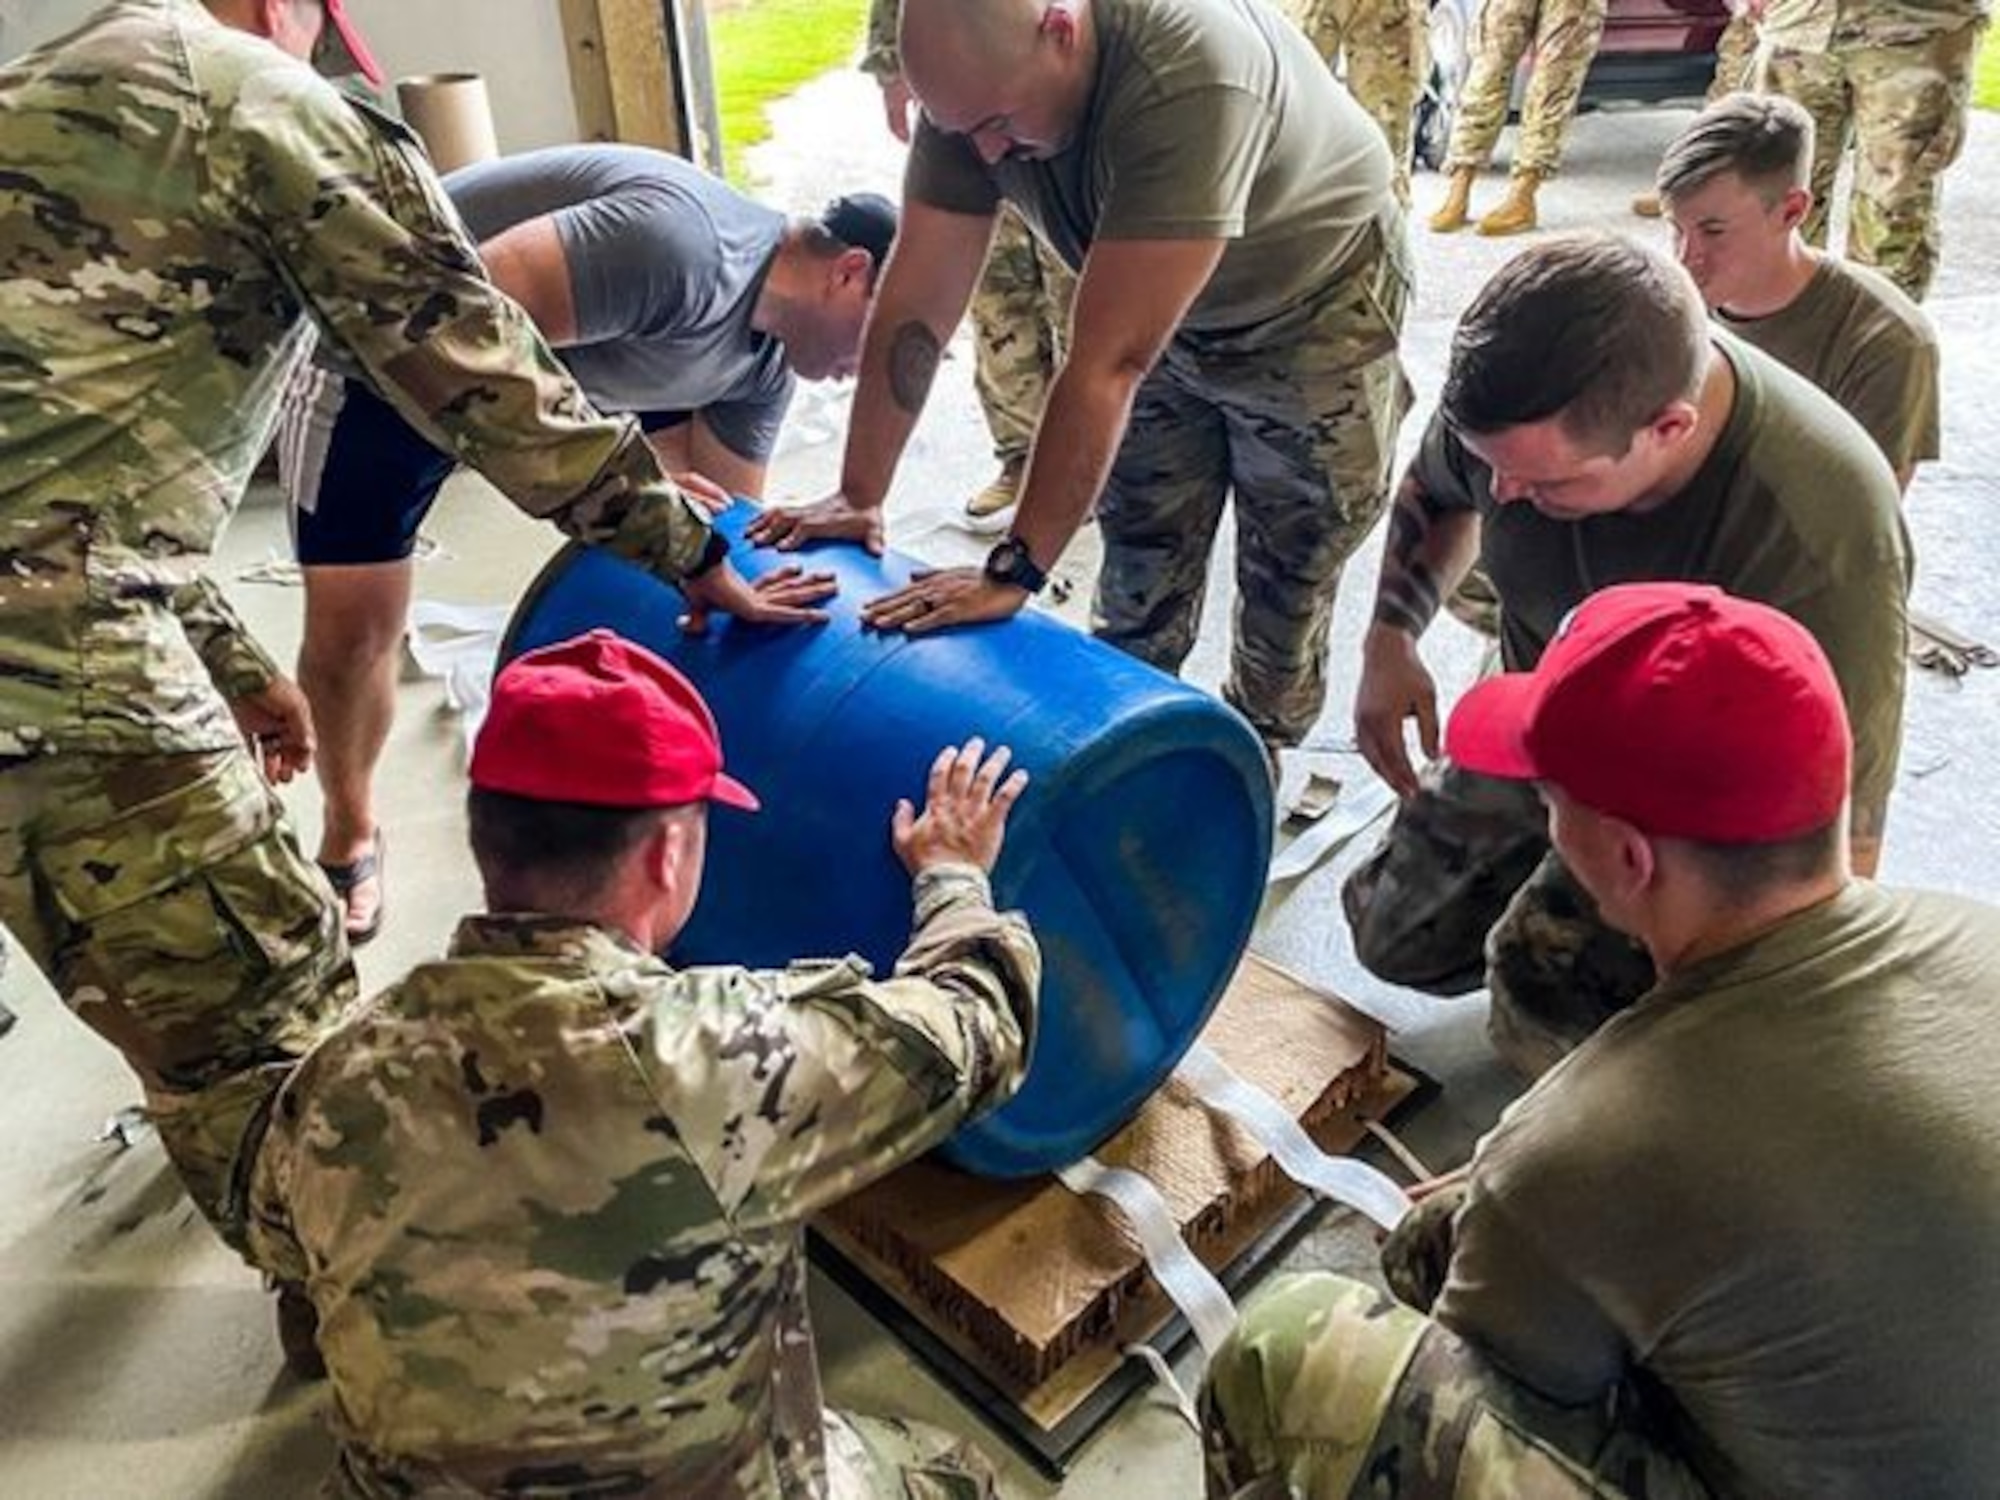 A crew comprised of U.S. Army parachute riggers with Group Support Battalion, 1st Special Forces Group (Airborne), 82nd Airborne Division, and a parachute rigger assigned to U.S. Navy Special Warfare Command built and apparatus at Andersen Air Force Base, Guam, to deliver medical supplies to an injured service member aboard a vessel out at sea, July 25, 2021.  The parachute riggers are currently supporting exercise Forager 21, which is a U.S. Army Pacific exercise designed to exercise Joint-integrated operations just like this rescue mission was.